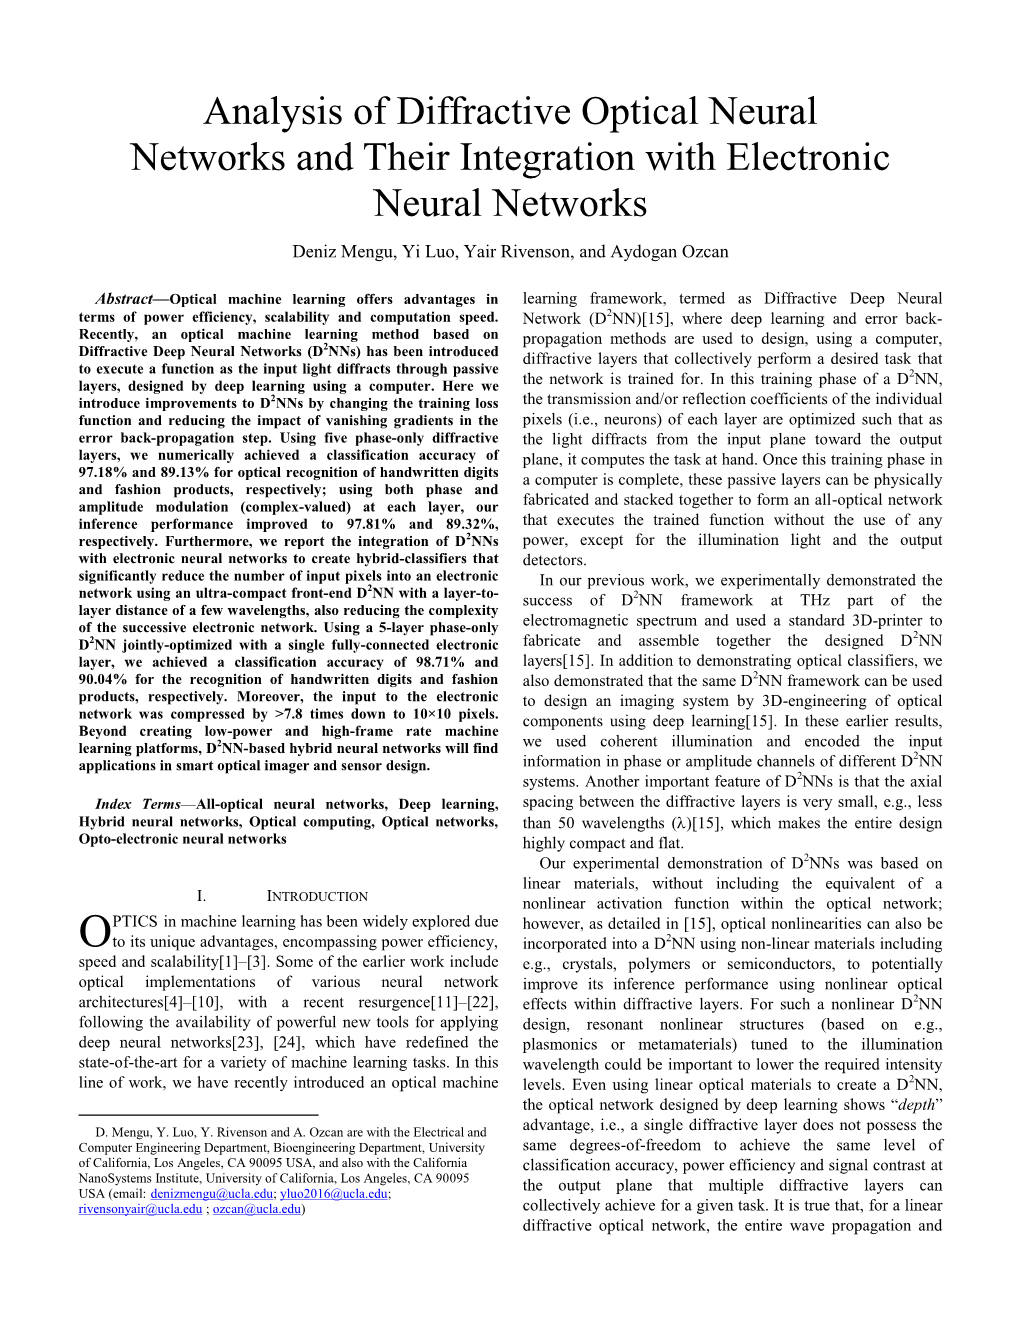 Analysis of Diffractive Optical Neural Networks and Their Integration with Electronic Neural Networks Deniz Mengu, Yi Luo, Yair Rivenson, and Aydogan Ozcan